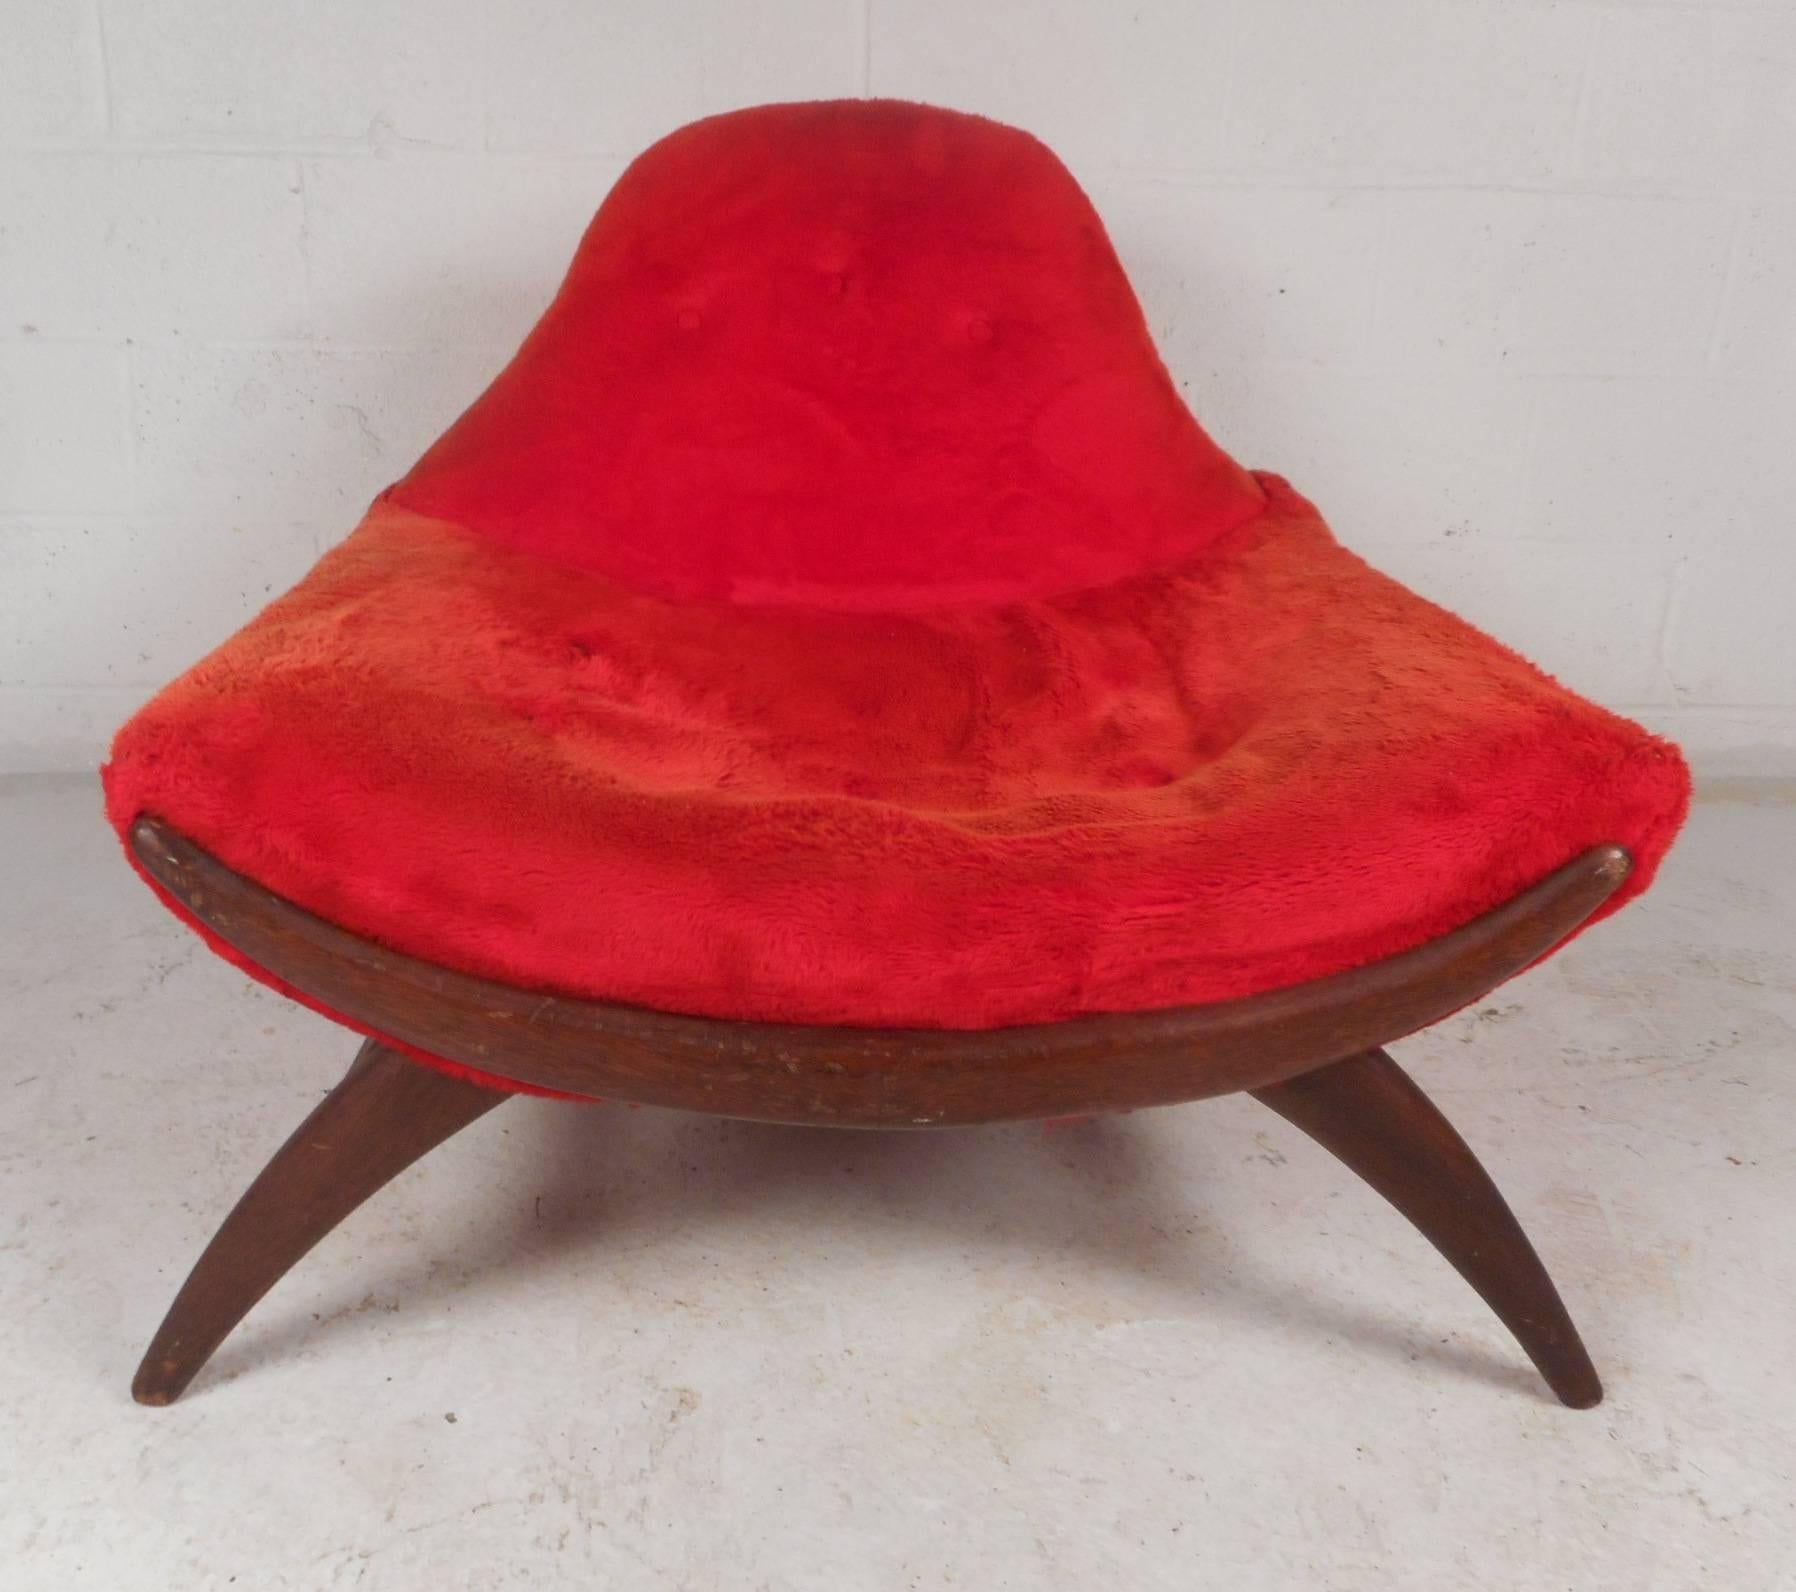 This beautiful vintage modern lounge chair features an unusual curved front and sculpted frame. Extremely comfortable design with thick padded seating and elaborate plush red upholstery. Quality construction with a sturdy walnut frame makes this